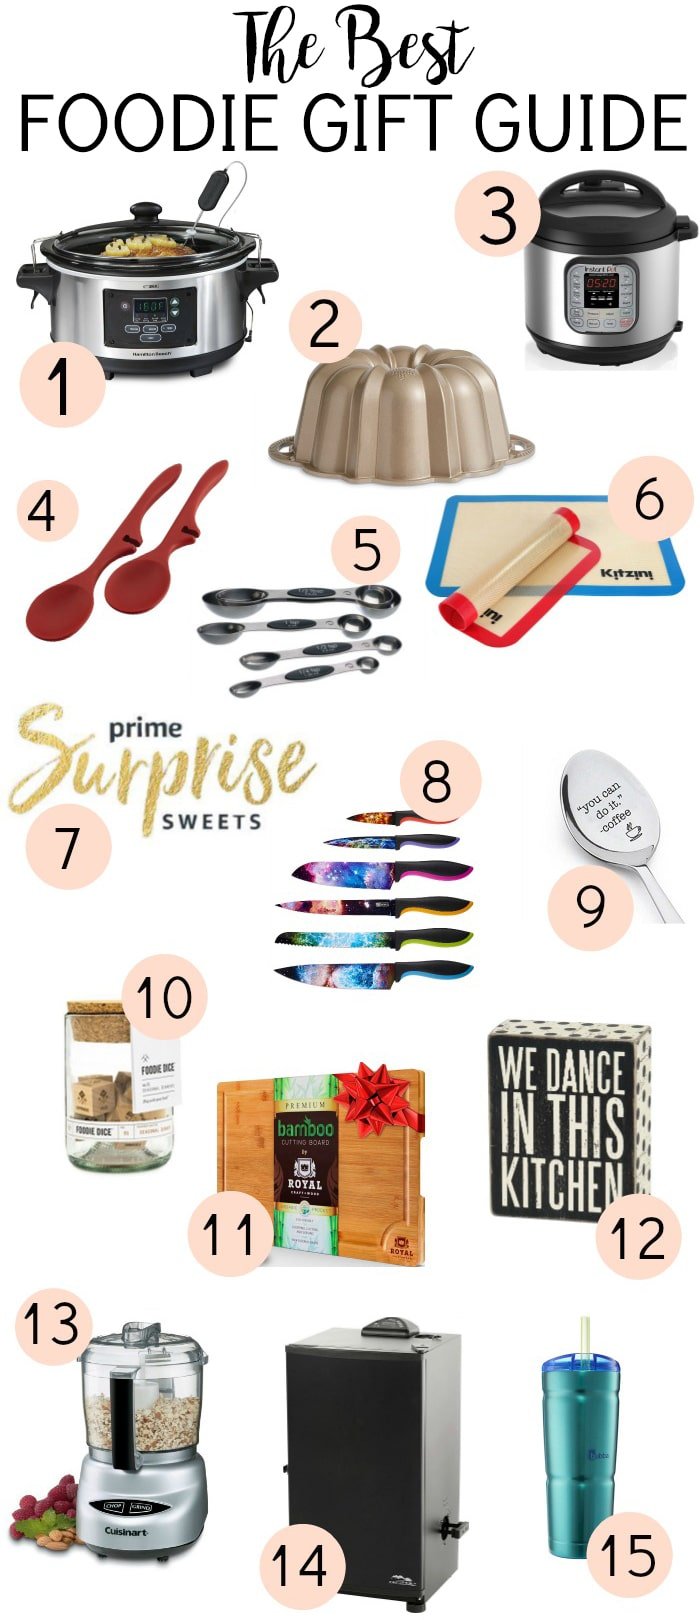 The Best Foodie Gift Guide will make it easy to find the perfect present for the food and kitchen gadget lovers in your life! | www.persnicketyplates.com